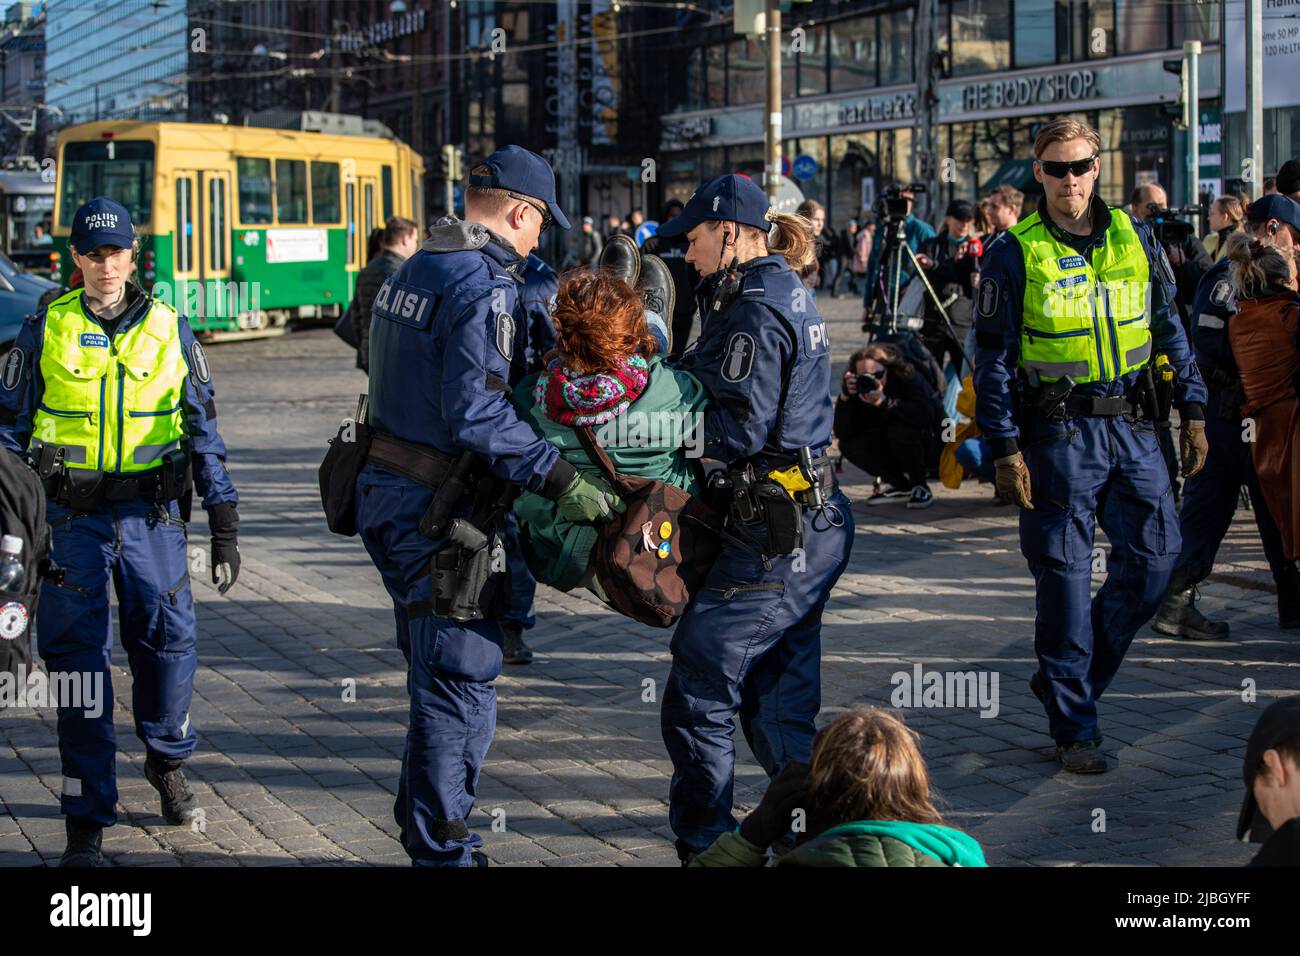 Street blocking protester being arrested and carried away by police at Elokapina's  demonstration in Mannerheimintie, Helsinki, Finland Stock Photo